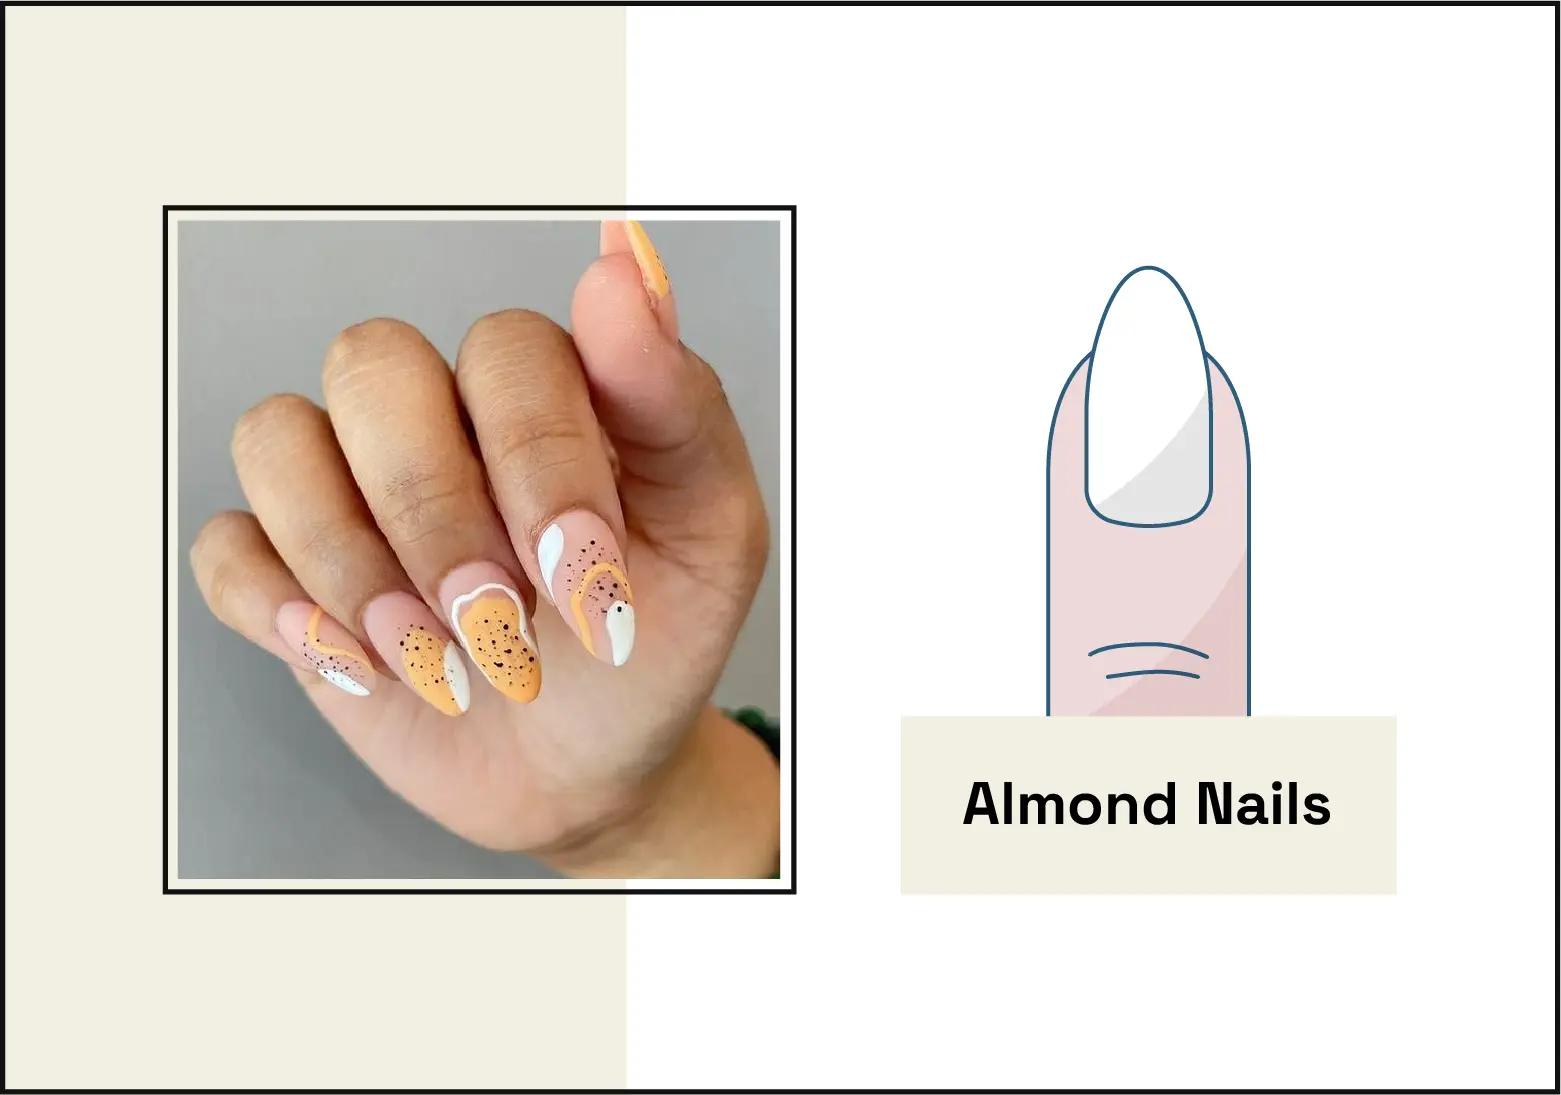 photo of manicure with almond-shaped nails with orange, white, and black nail art on the left, illustration of the almond nail shape on the right